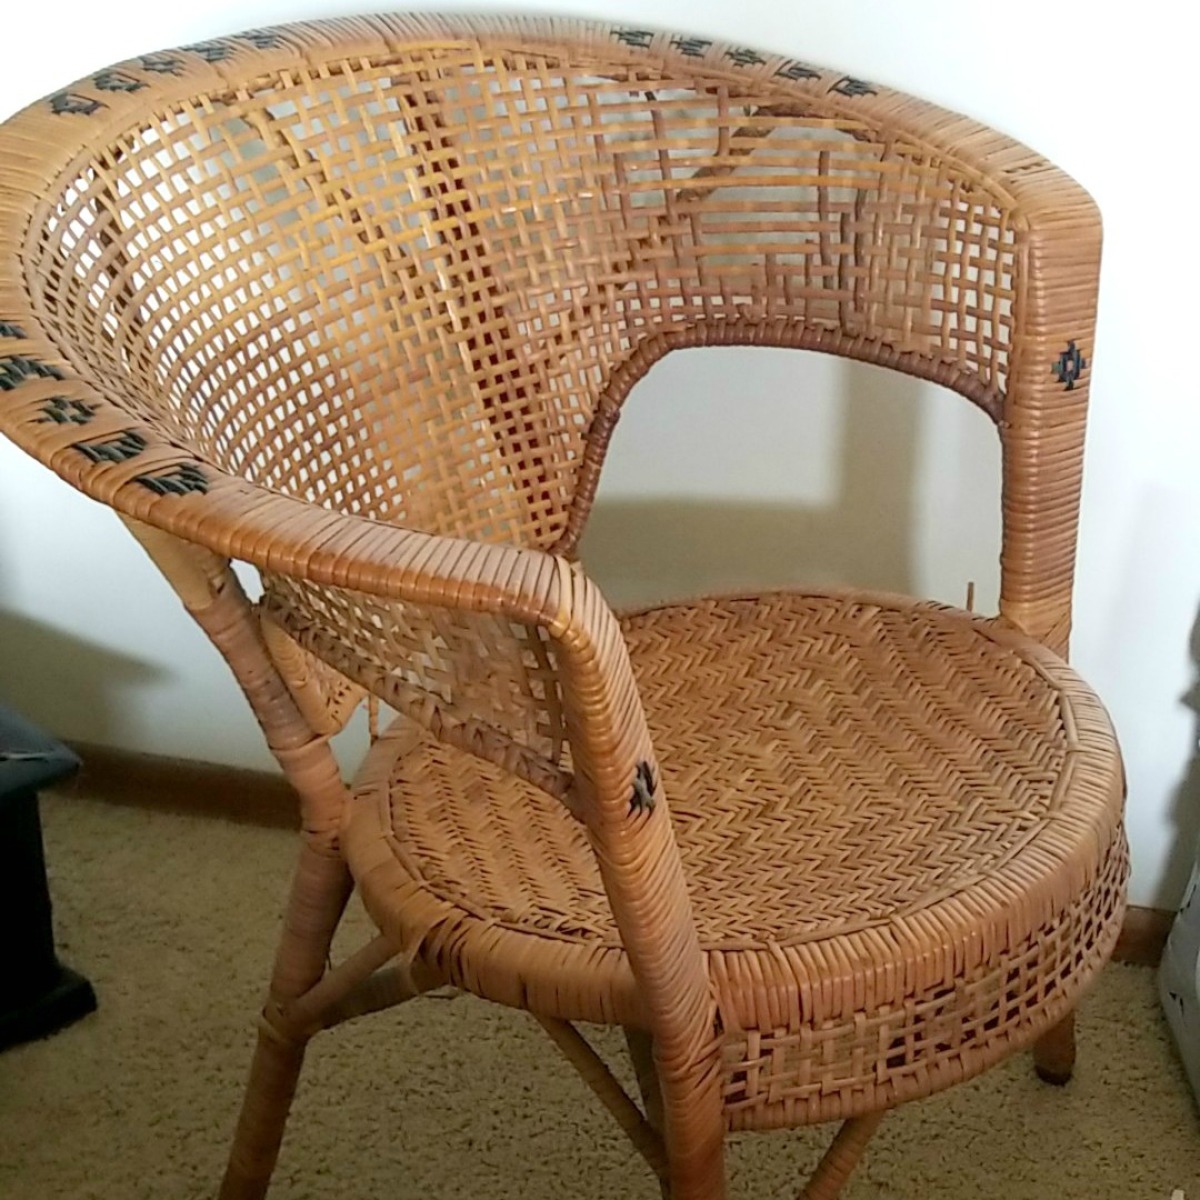 Value of a Vintage Wicker Chair? ThriftyFun